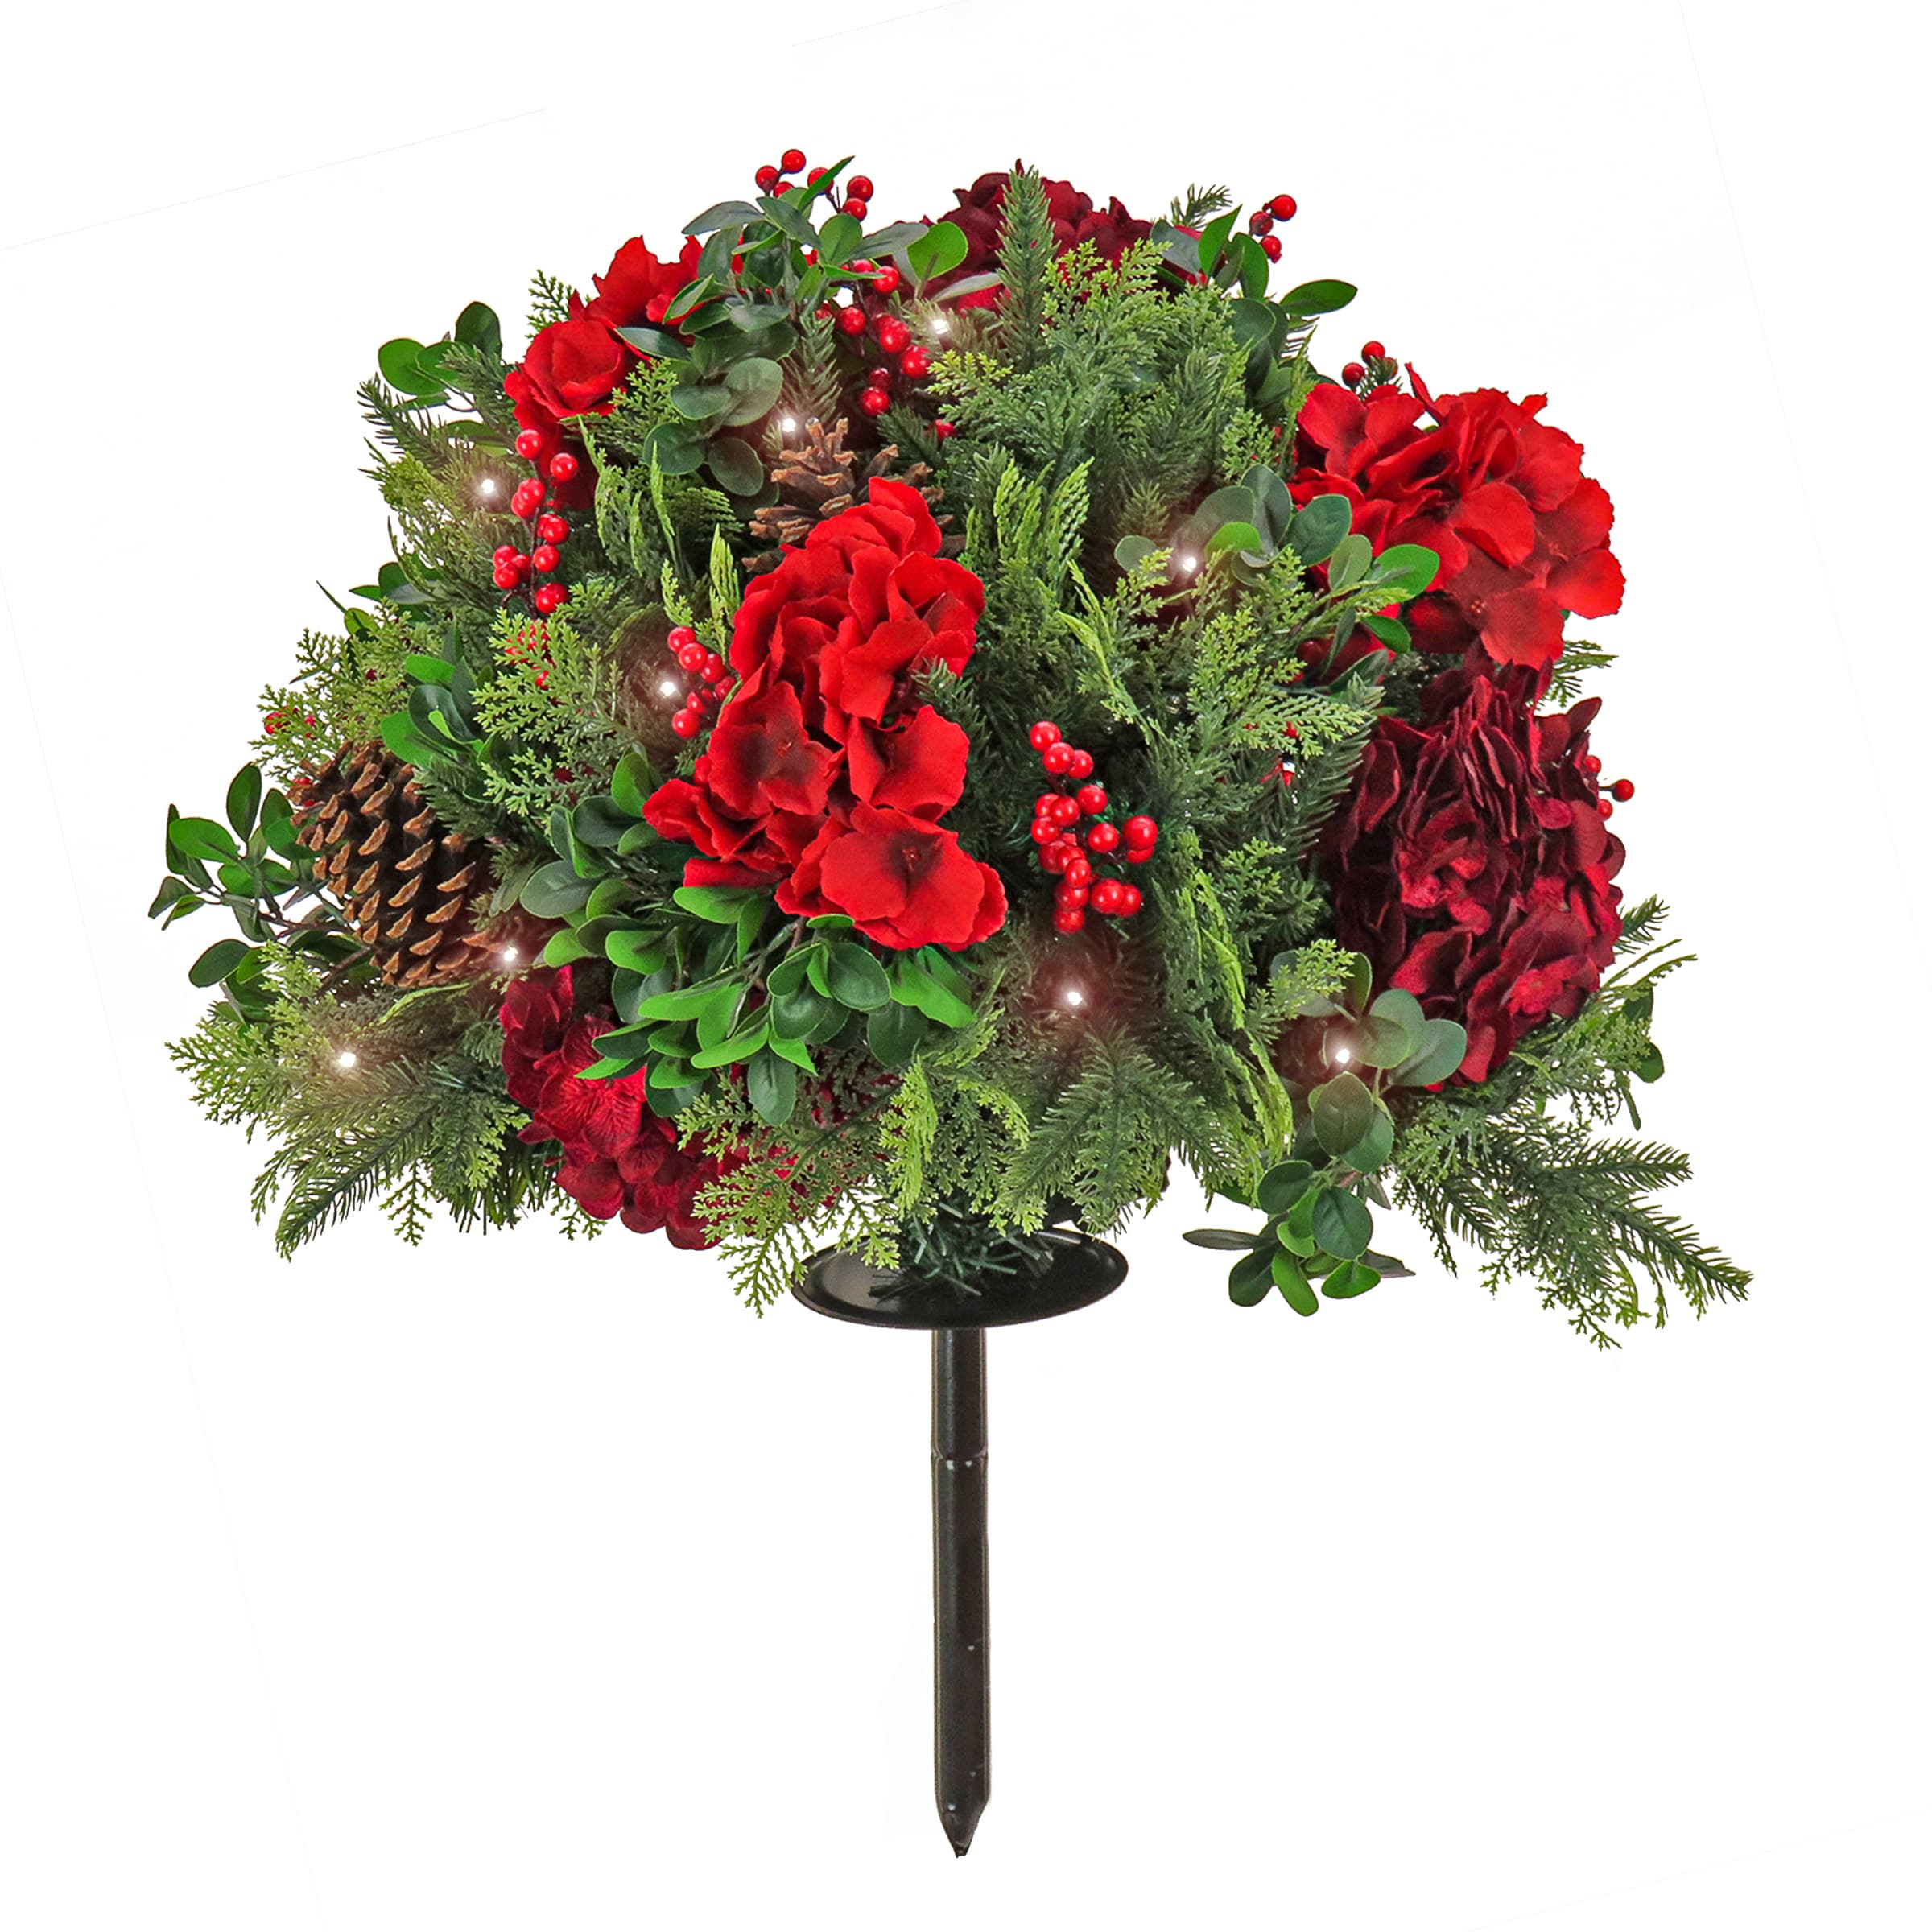 28 HGTV Home Collection Pre-Lit Holly and Berry Planter Filler